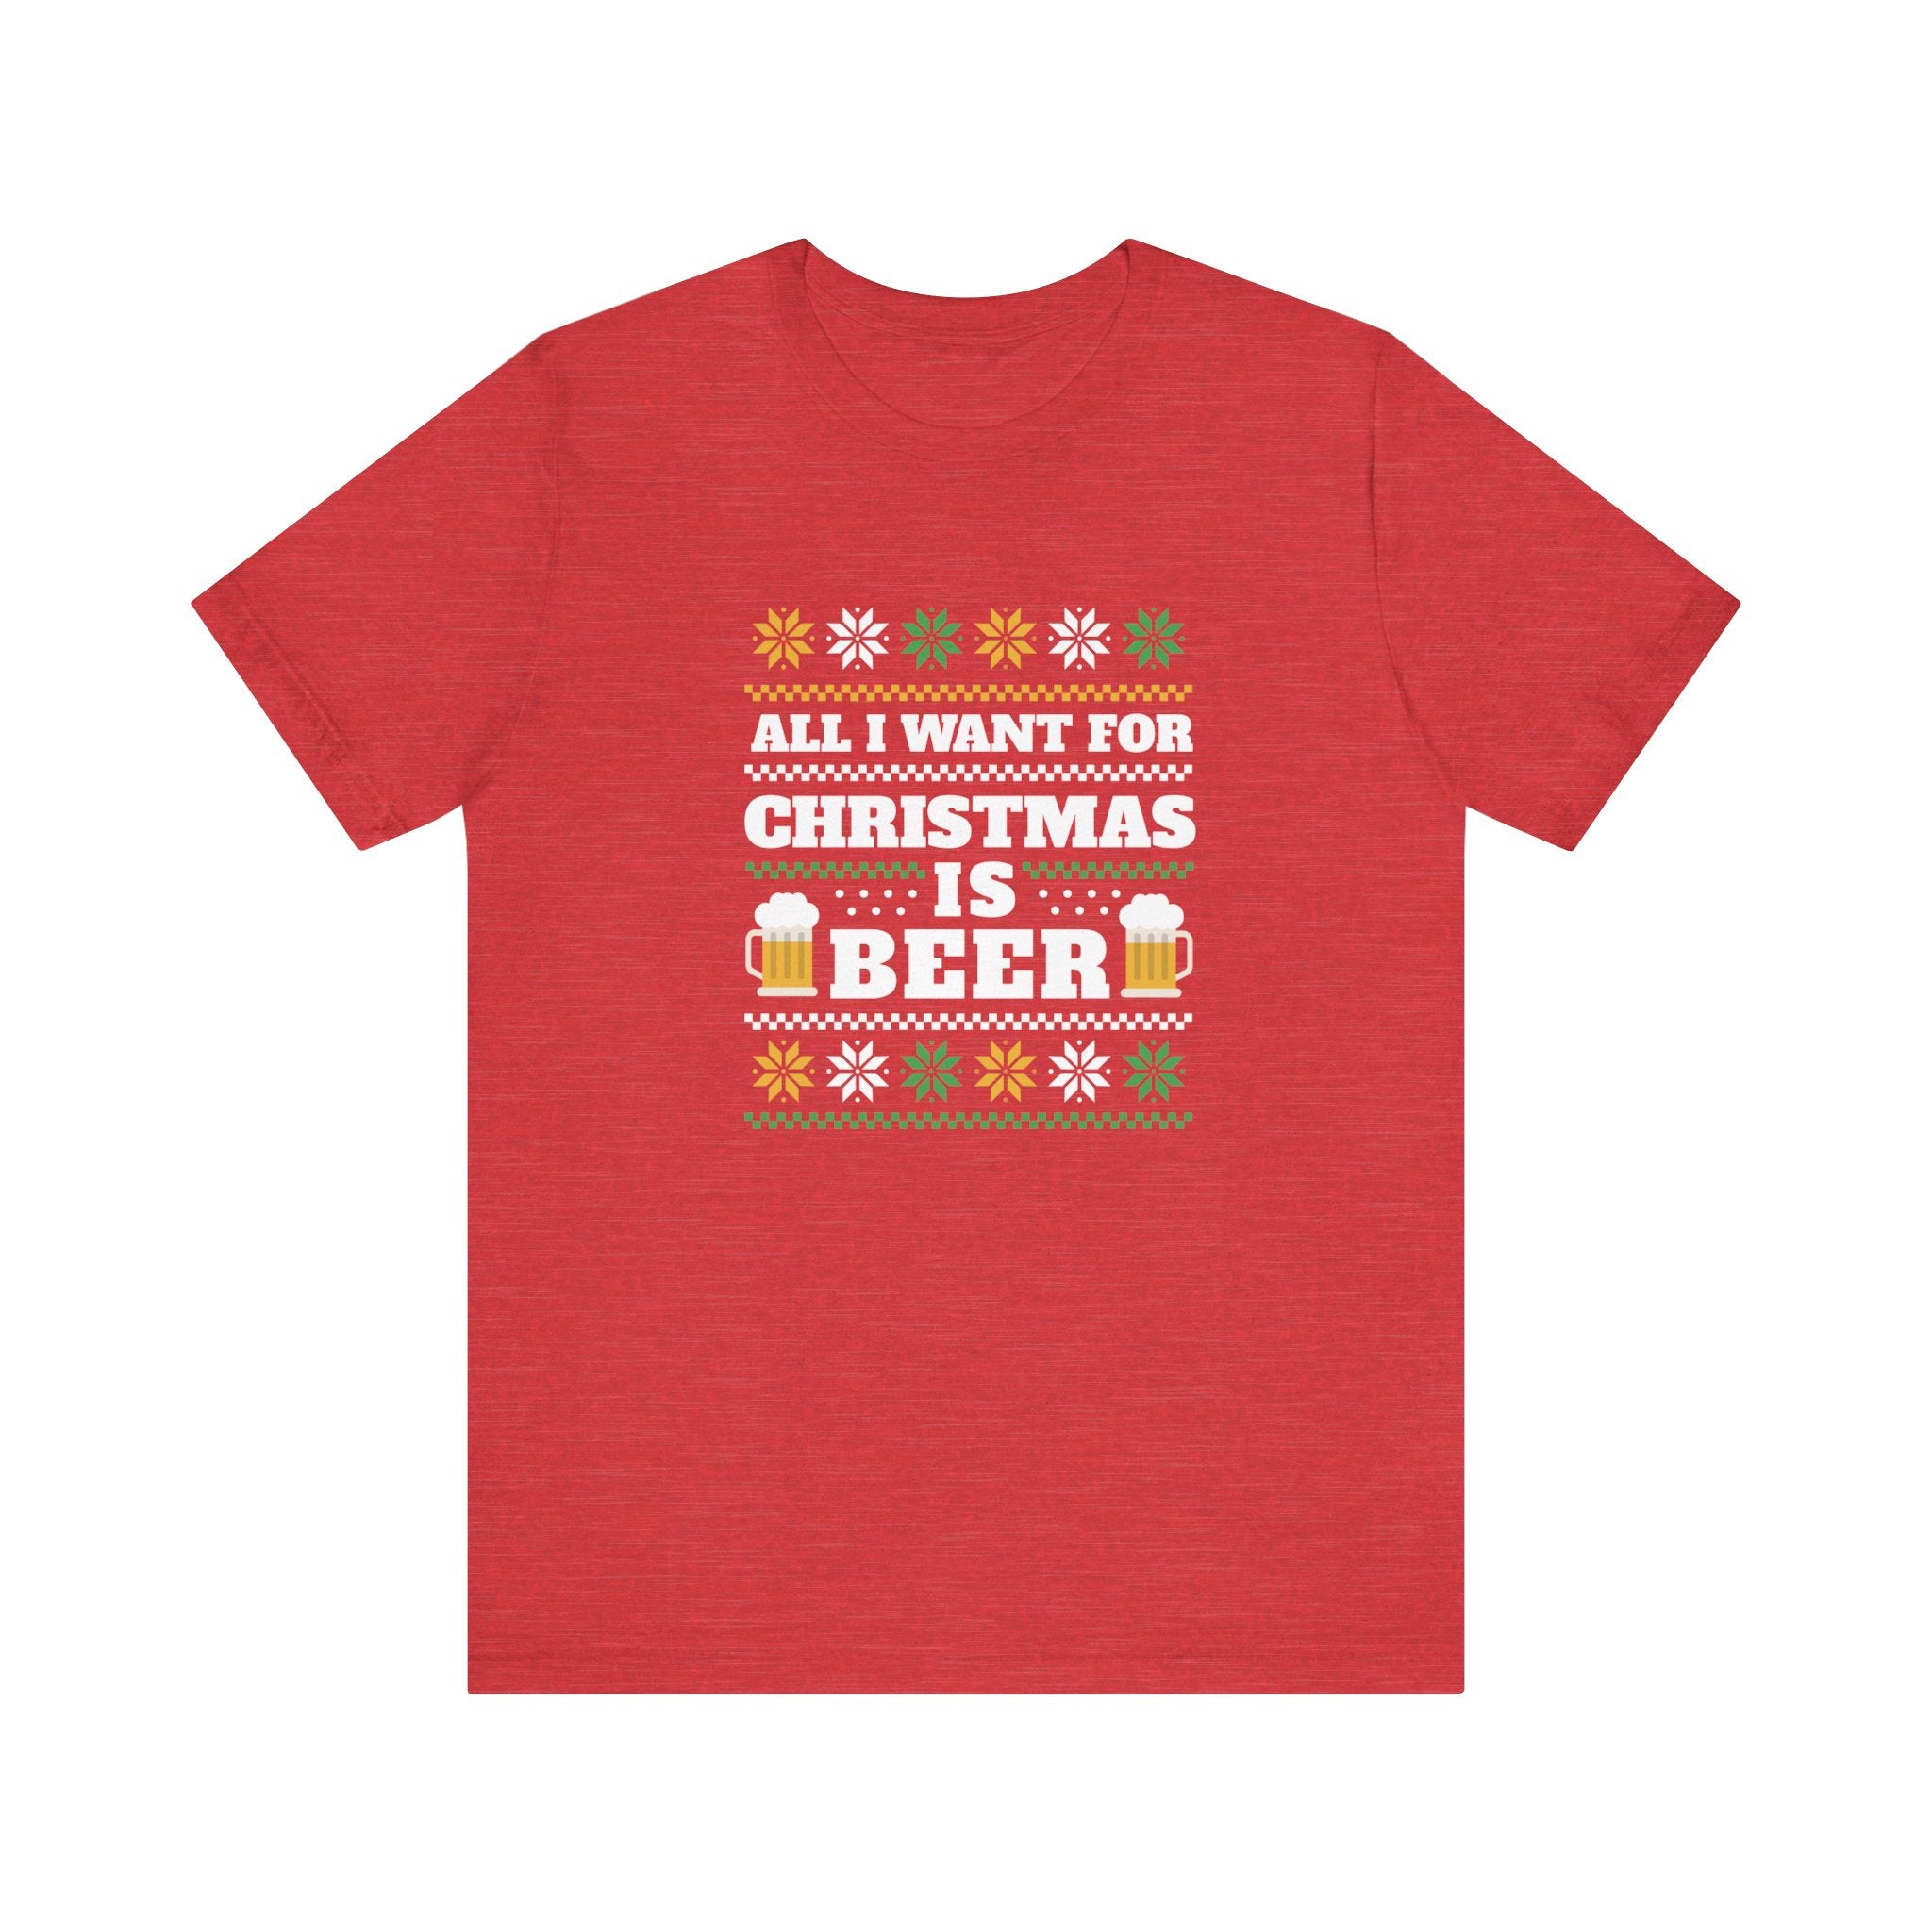 Red cotton T-shirt with holiday-themed text reading "All I want for Christmas is Beer," accompanied by decorative patterns and beer graphic icons, giving it a fun Beer Ugly Sweater - T-Shirt vibe.